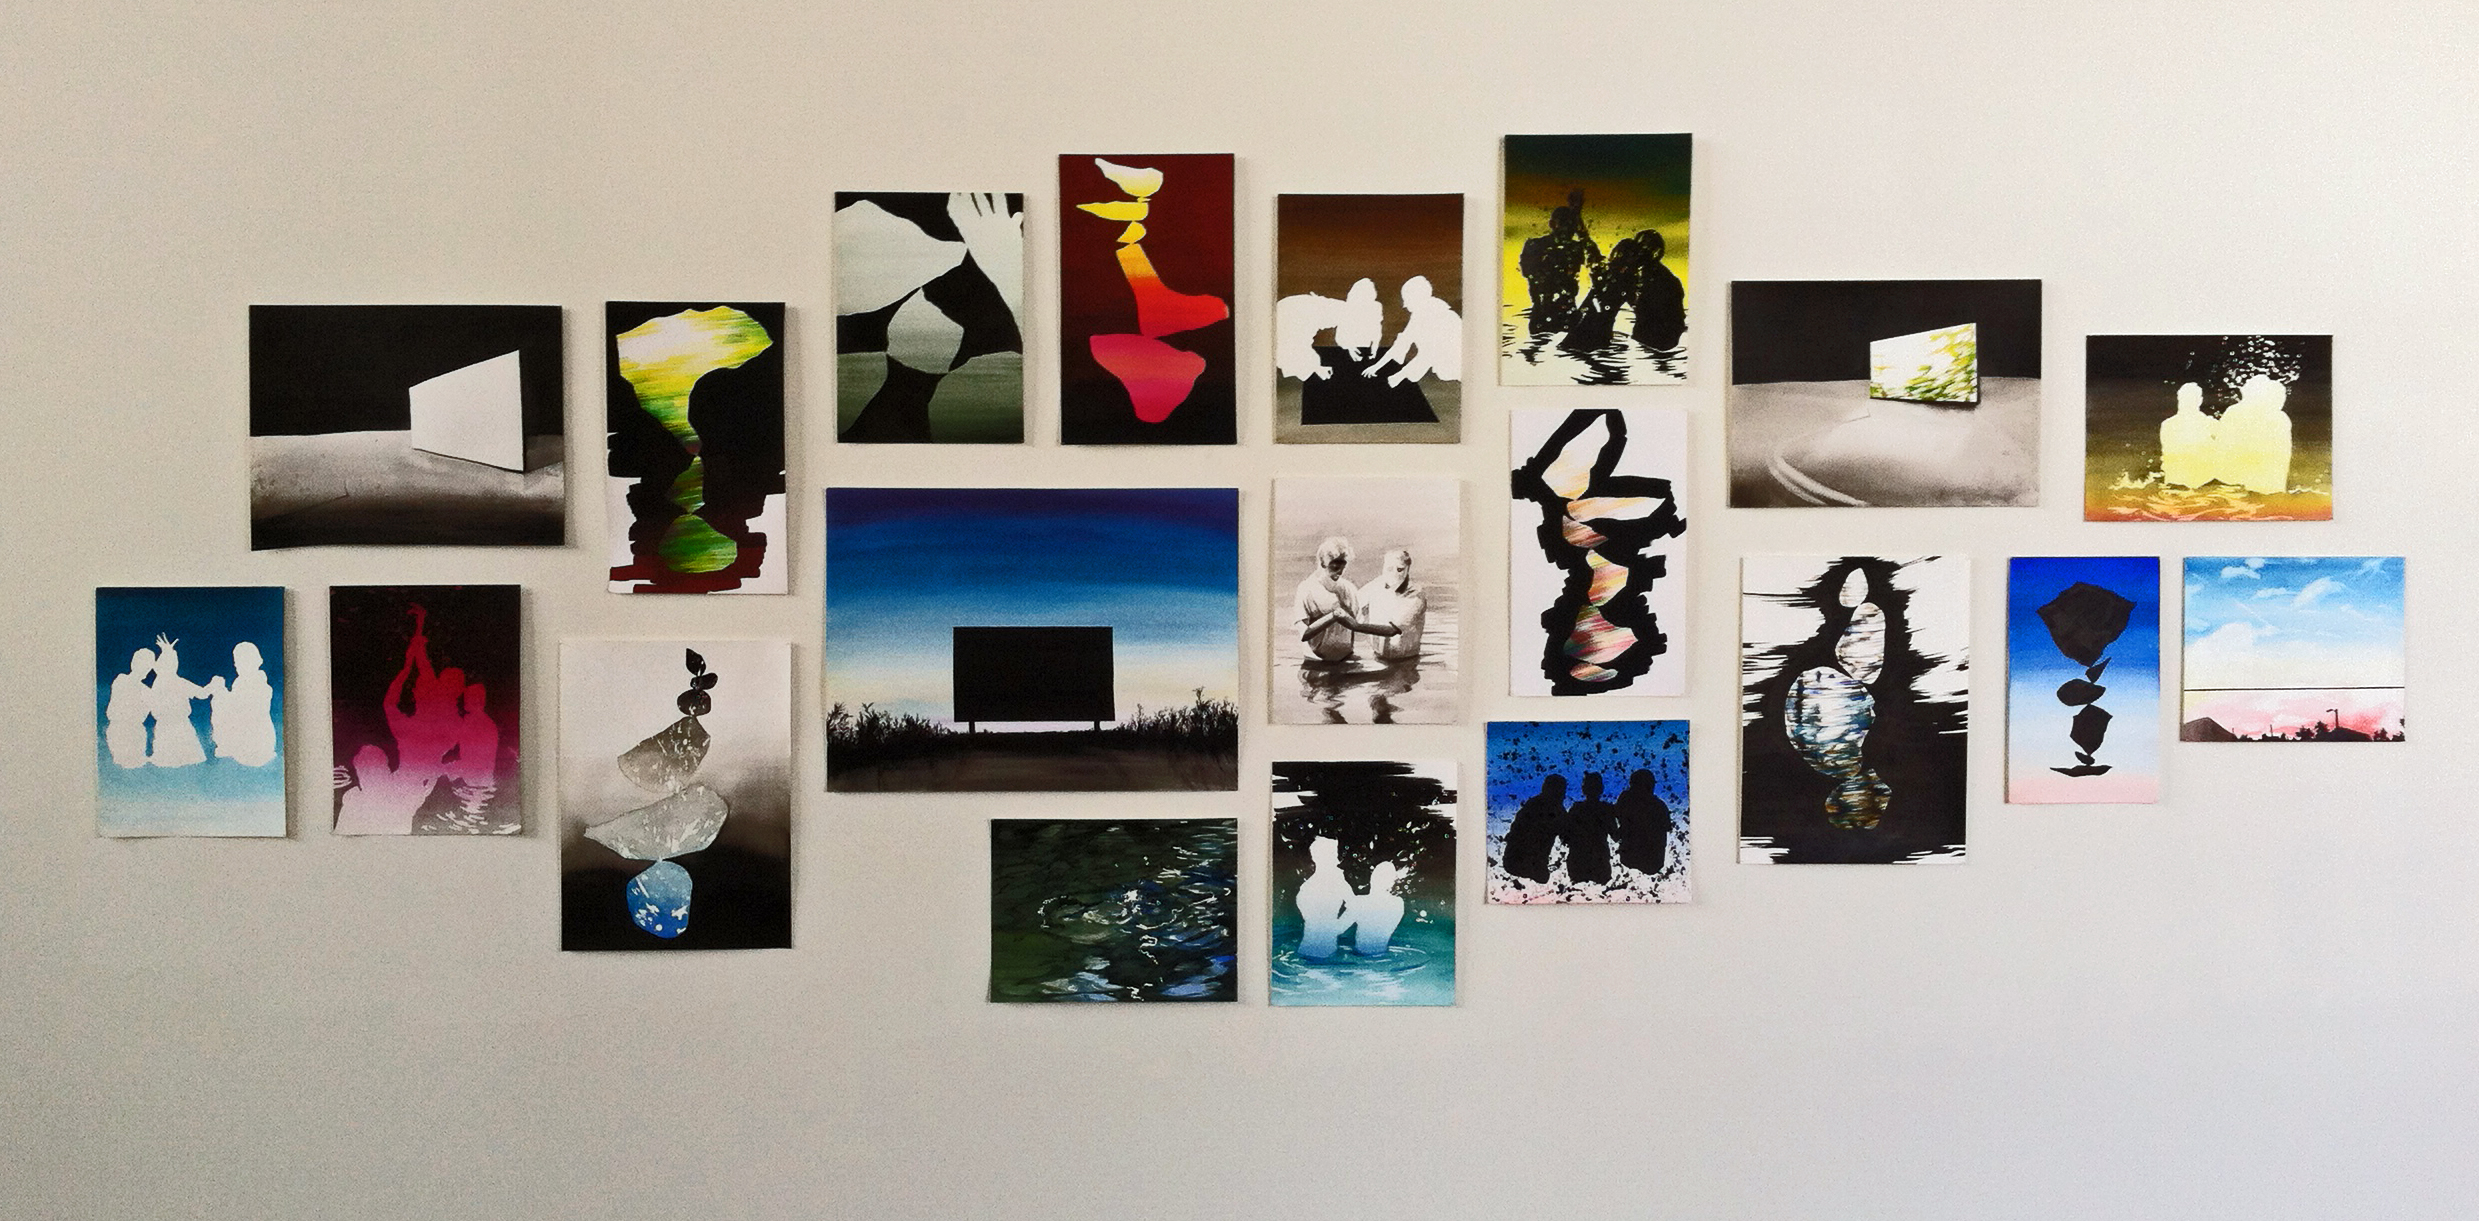 Studio Wall, 2014, oil on paper, sizes vary